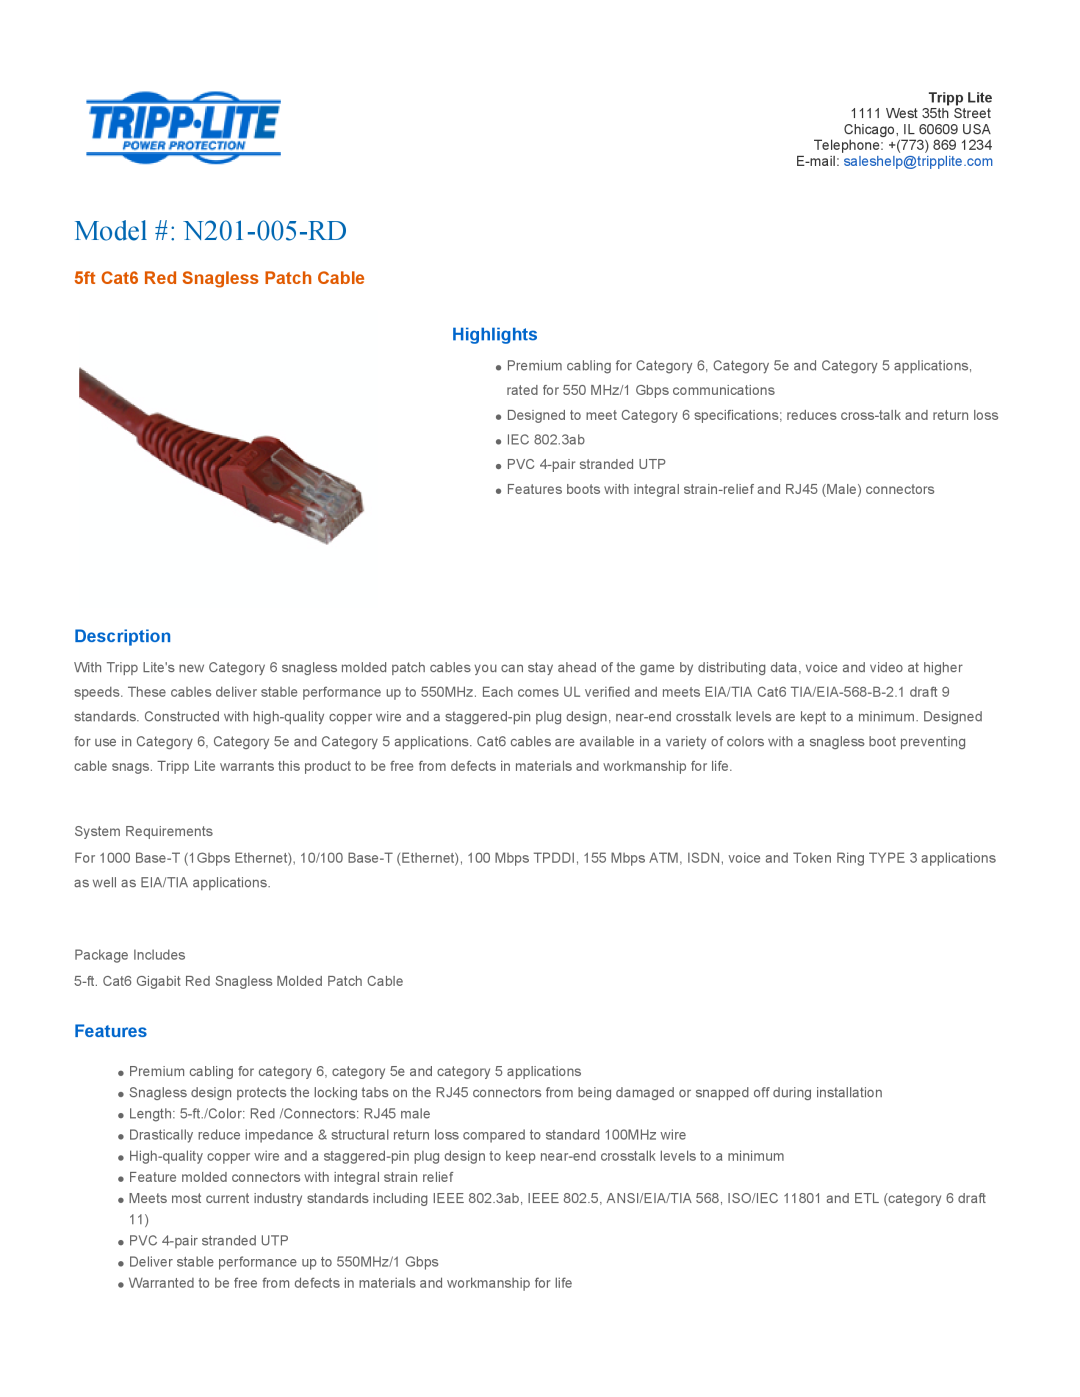 Tripp Lite specifications Highlights, Description, Features, Model # N201-005-RD, 5ft Cat6 Red Snagless Patch Cable 